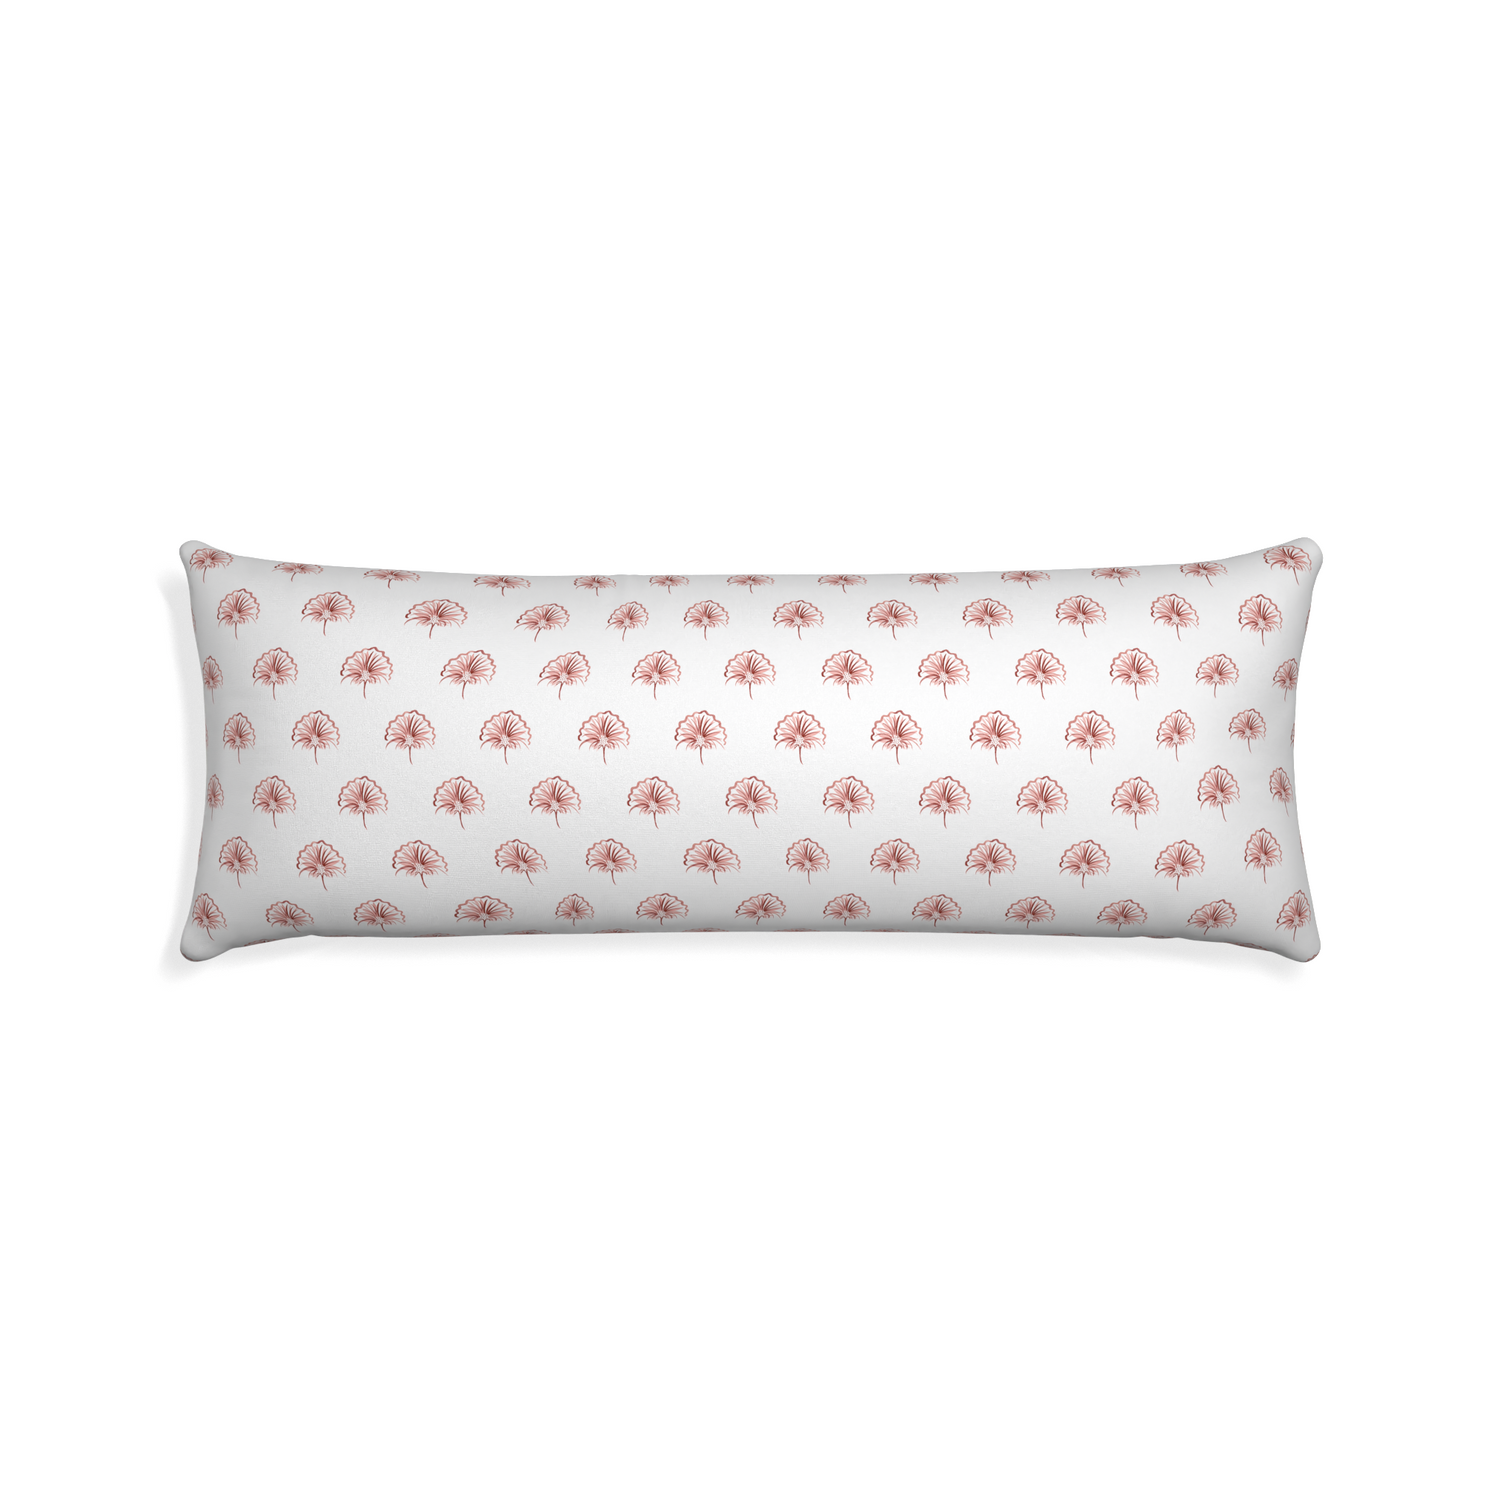 Xl-lumbar penelope rose custom pillow with none on white background